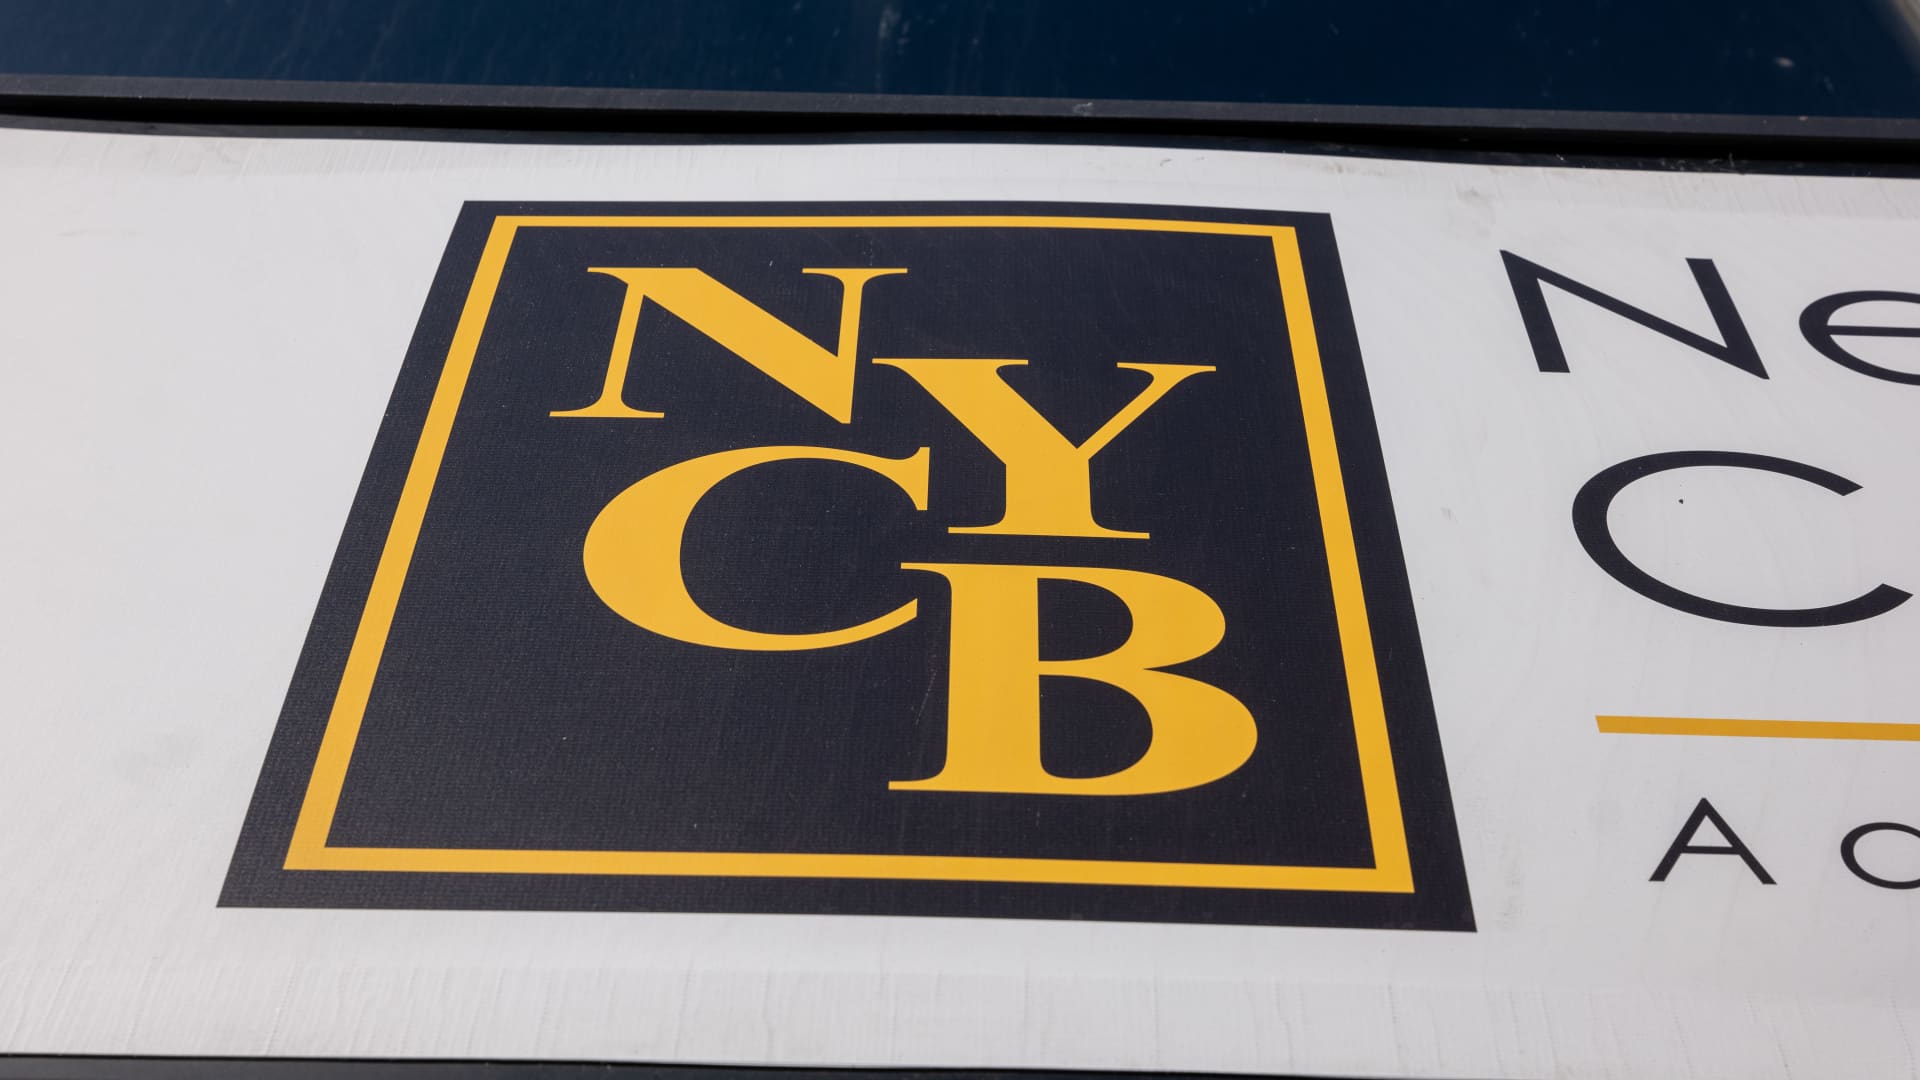 NYCB shares jump 30% after CEO gives two-year plan for ‘clear path to profitability’